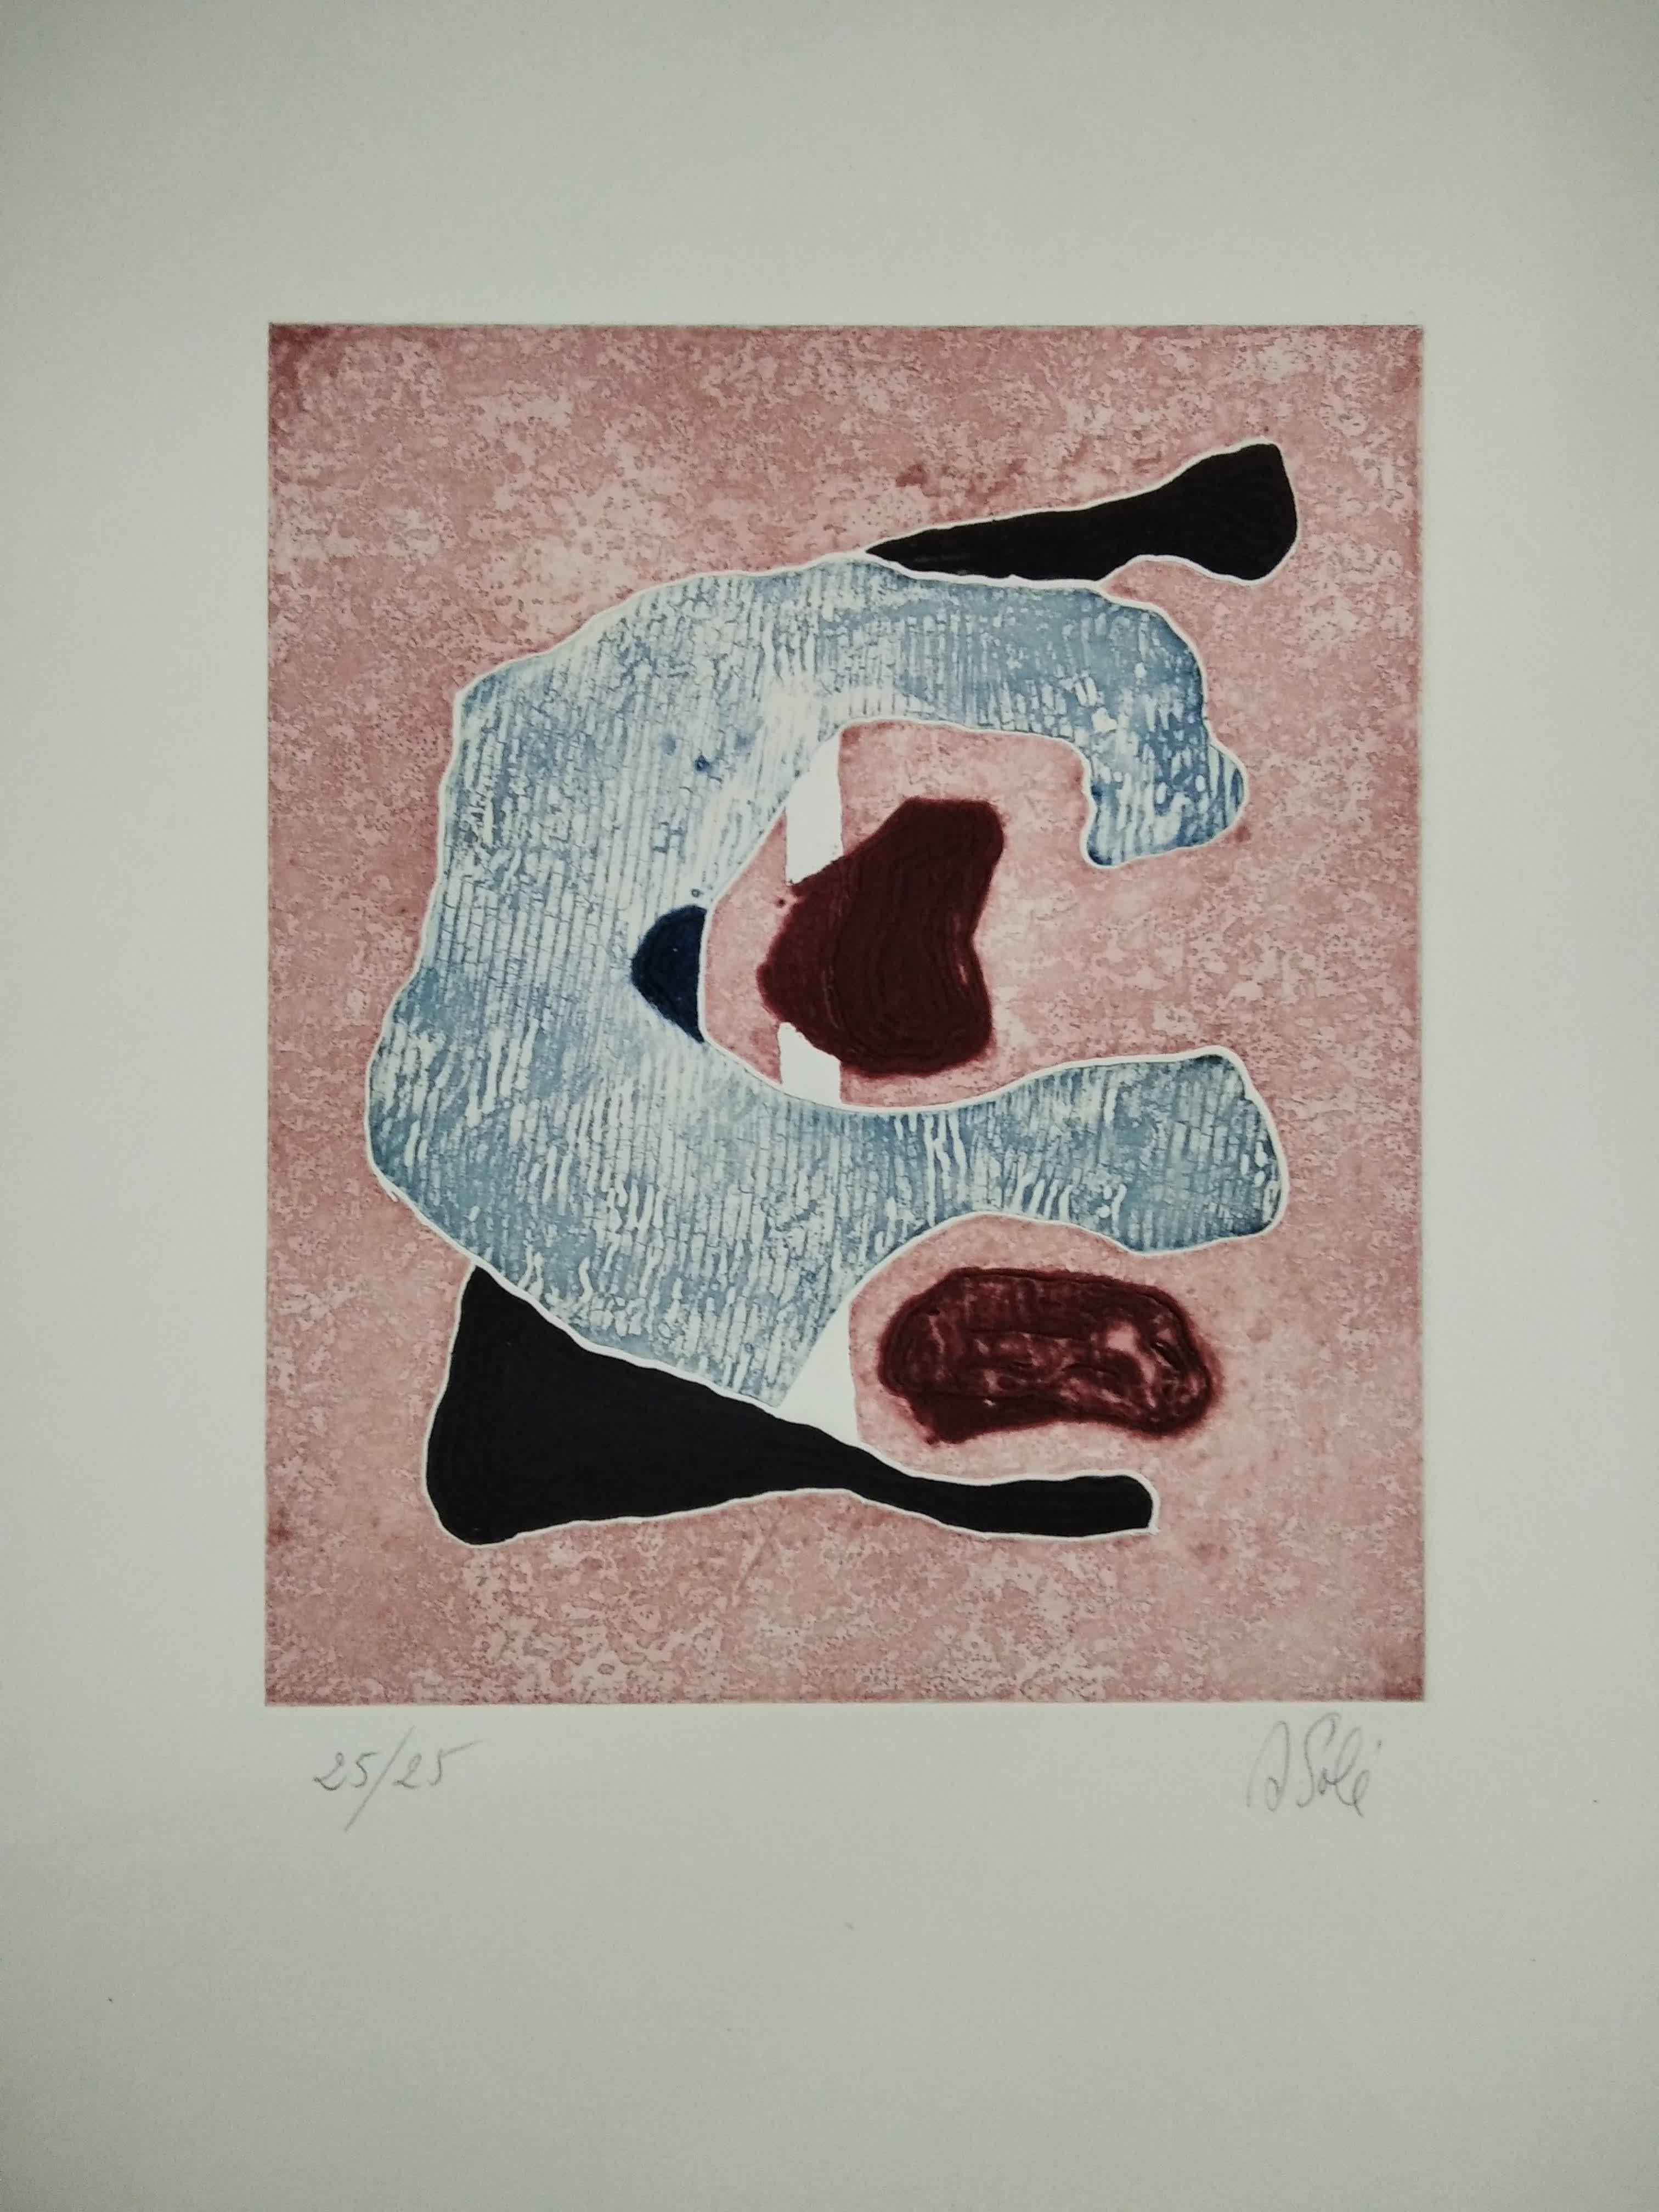 Untitled - Print by Jaume Solé